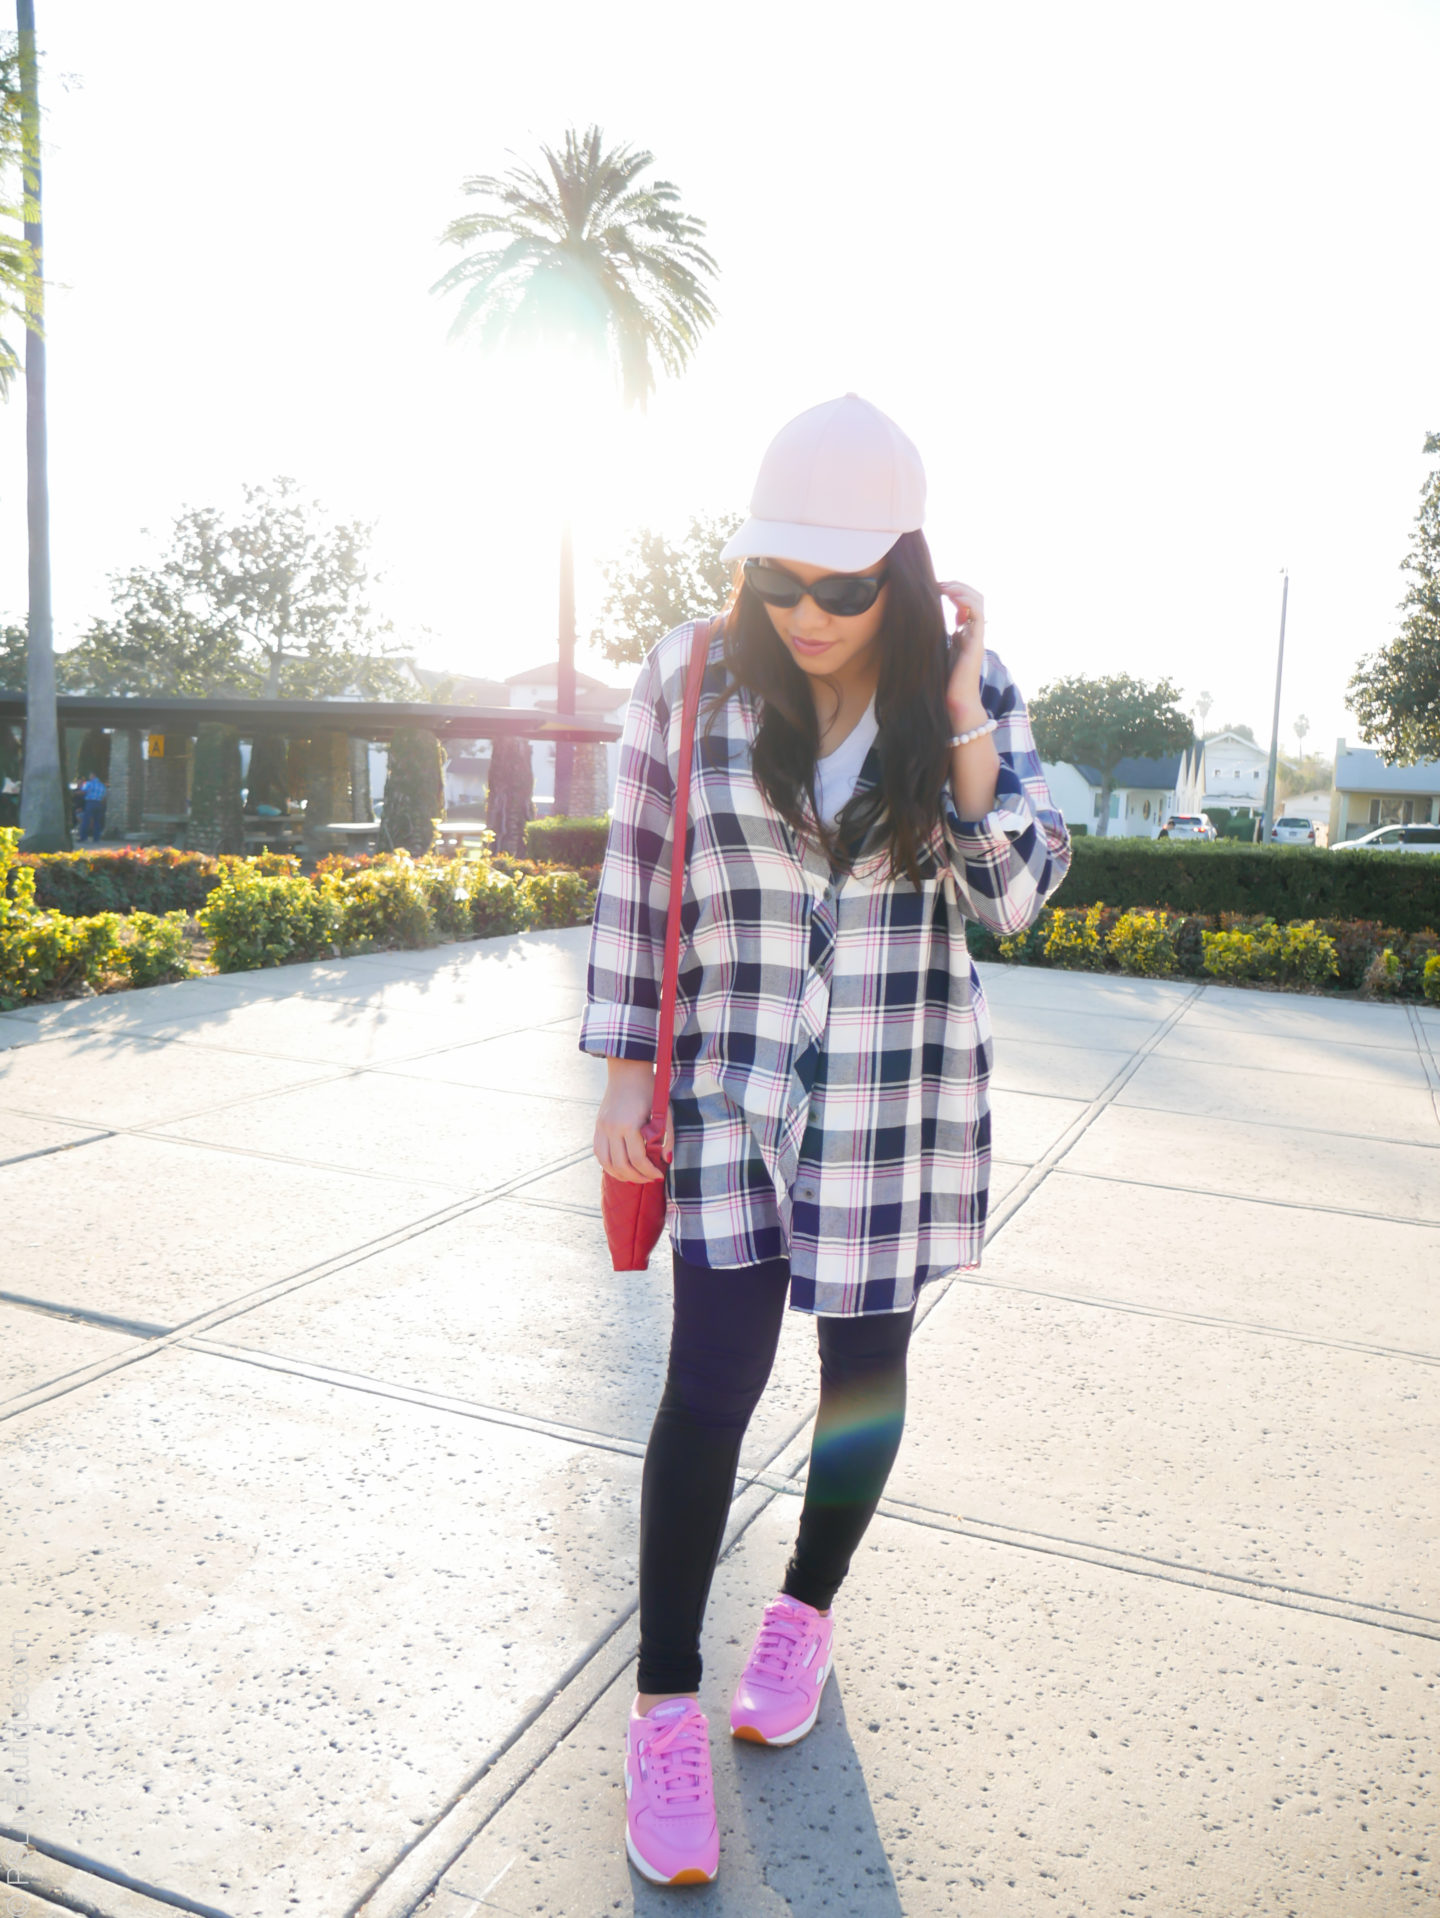 Gone Plaid... Instagram: @pslilyboutique, Pinterest, Los Angeles fashion blogger, top fashion blog, best fashion blog, fashion & personal style blog, travel blog, LA fashion blogger, winter 2018 outfit ideas, my style, casual, KUT from the Kloth blue and white plaid shirt, cat eye sunglasses, 2.6.18, red quilted mini small Stone Mountain crossbody bag, black leggings, pink leather Reebok classic sneakers shoes, casual 